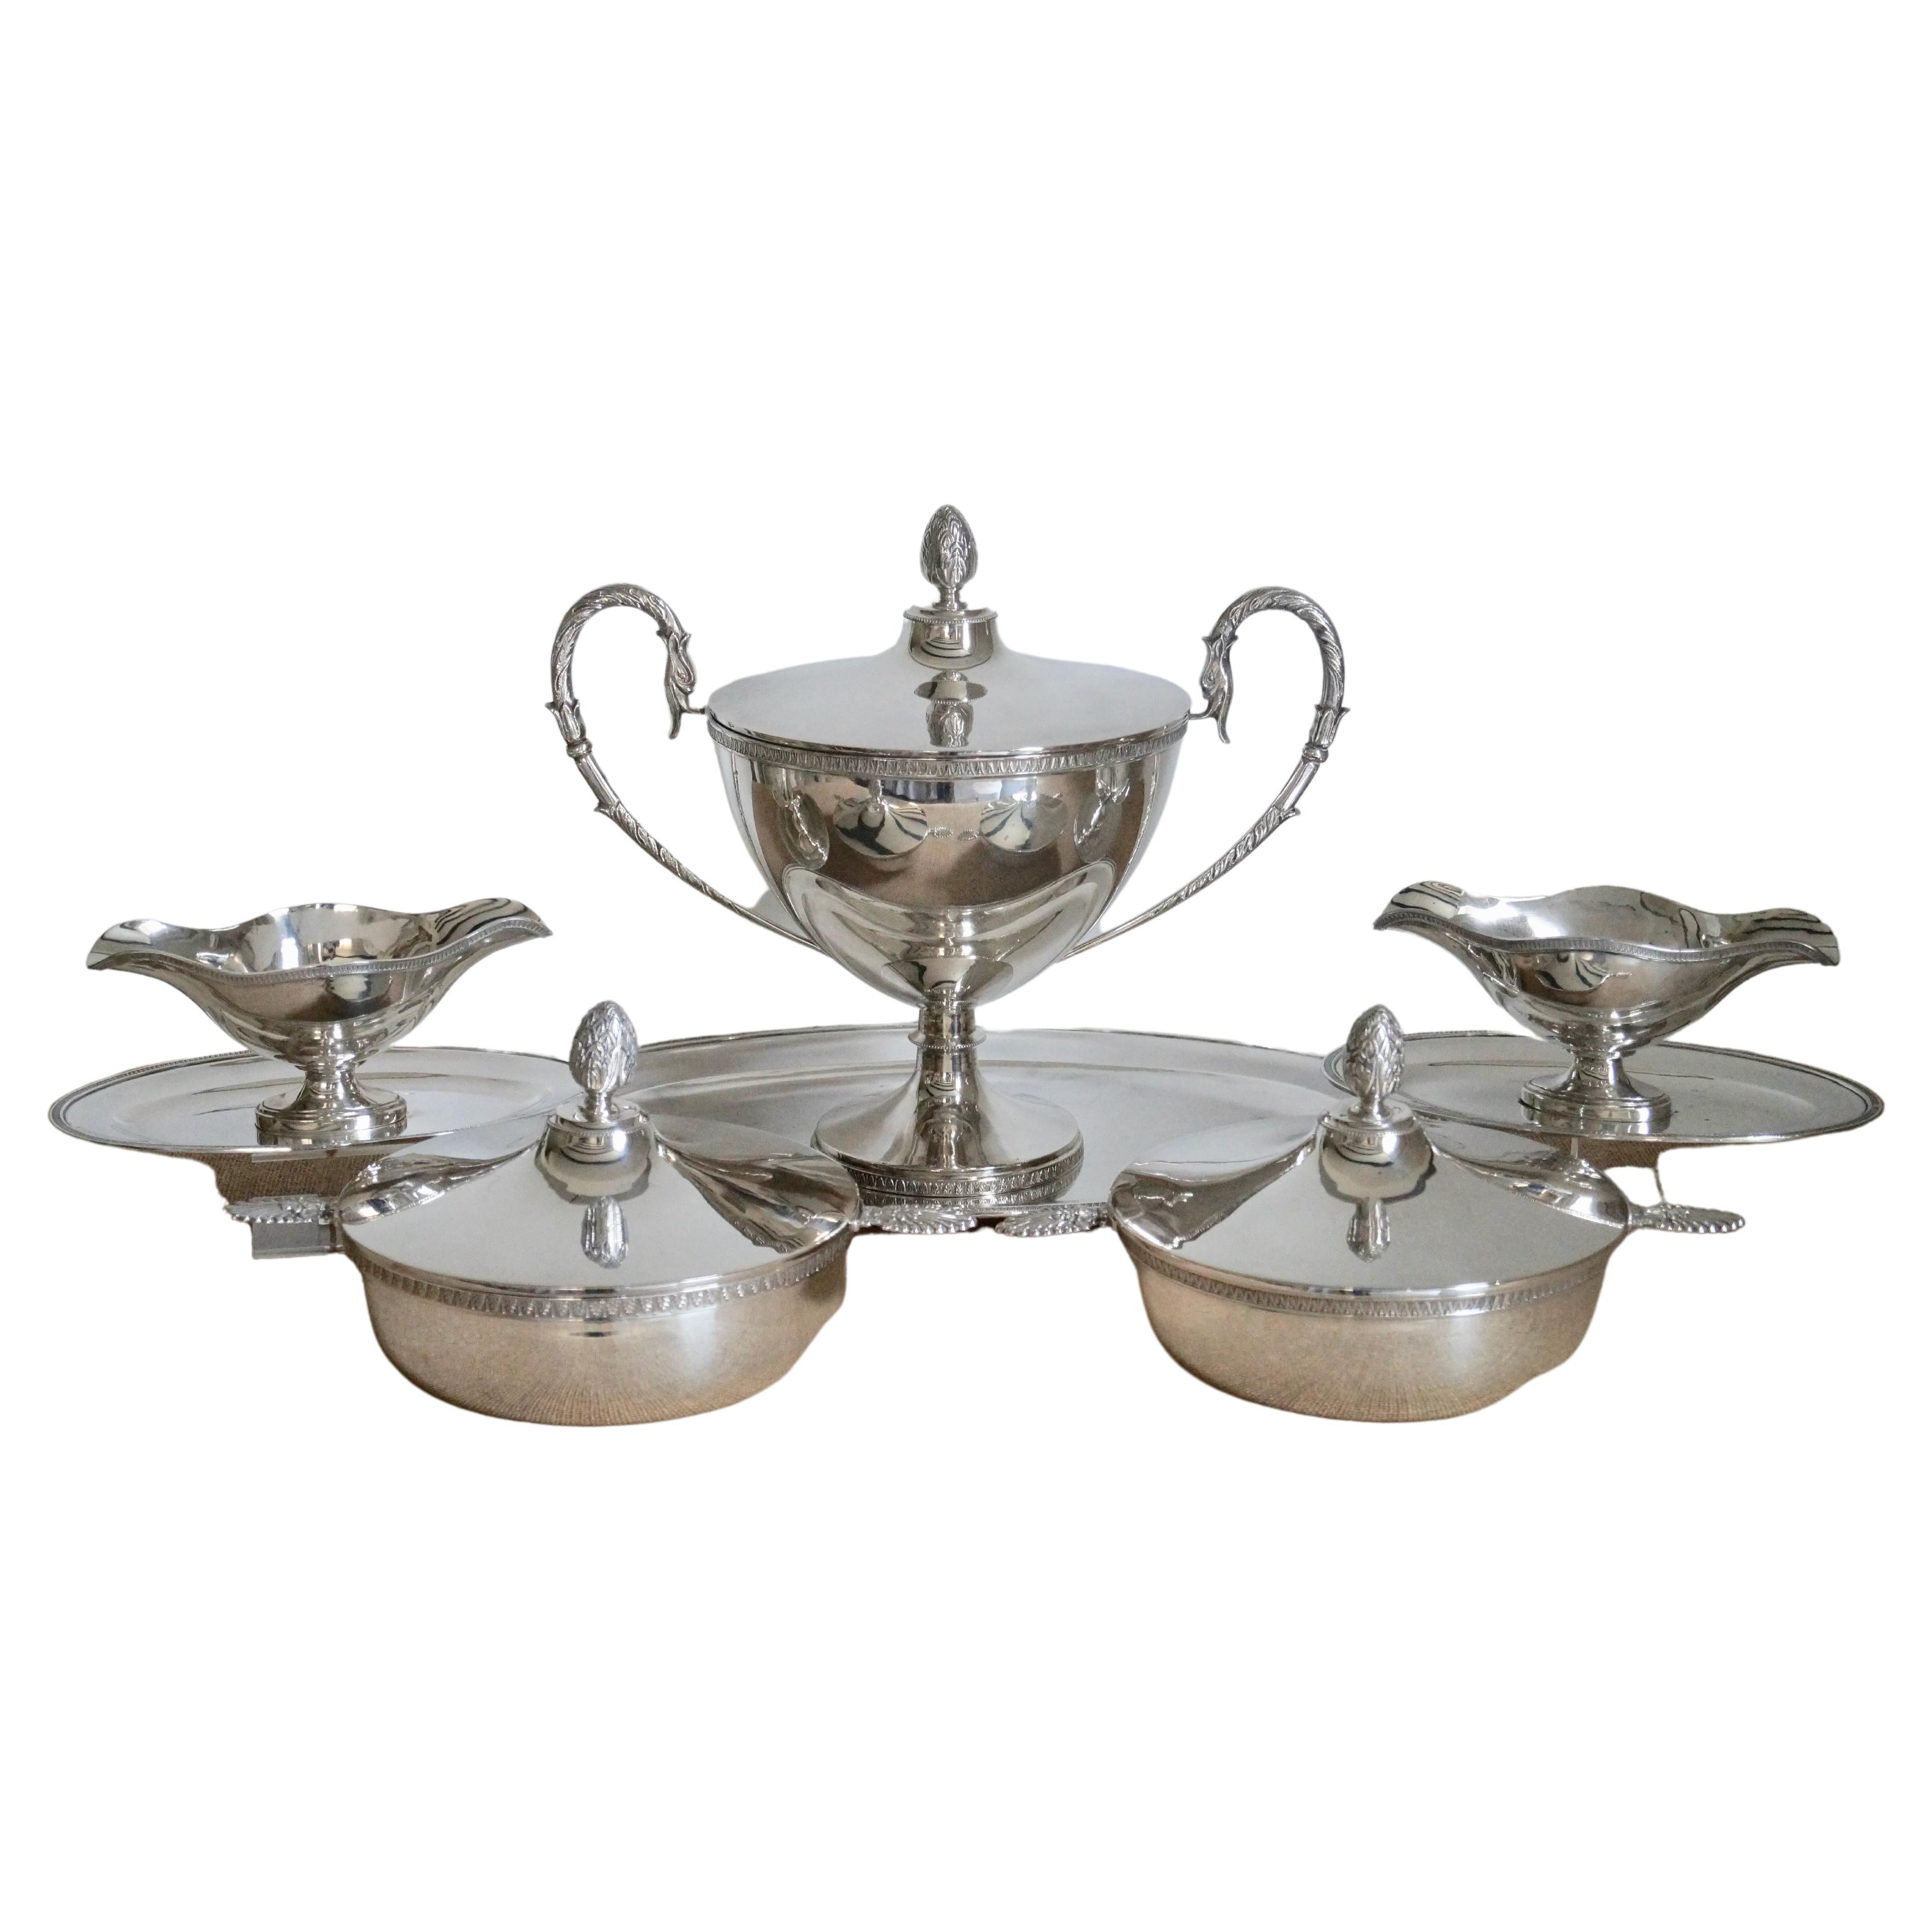 Set Antique French Silver Plated Tureens Serving Set Georgian Style 19